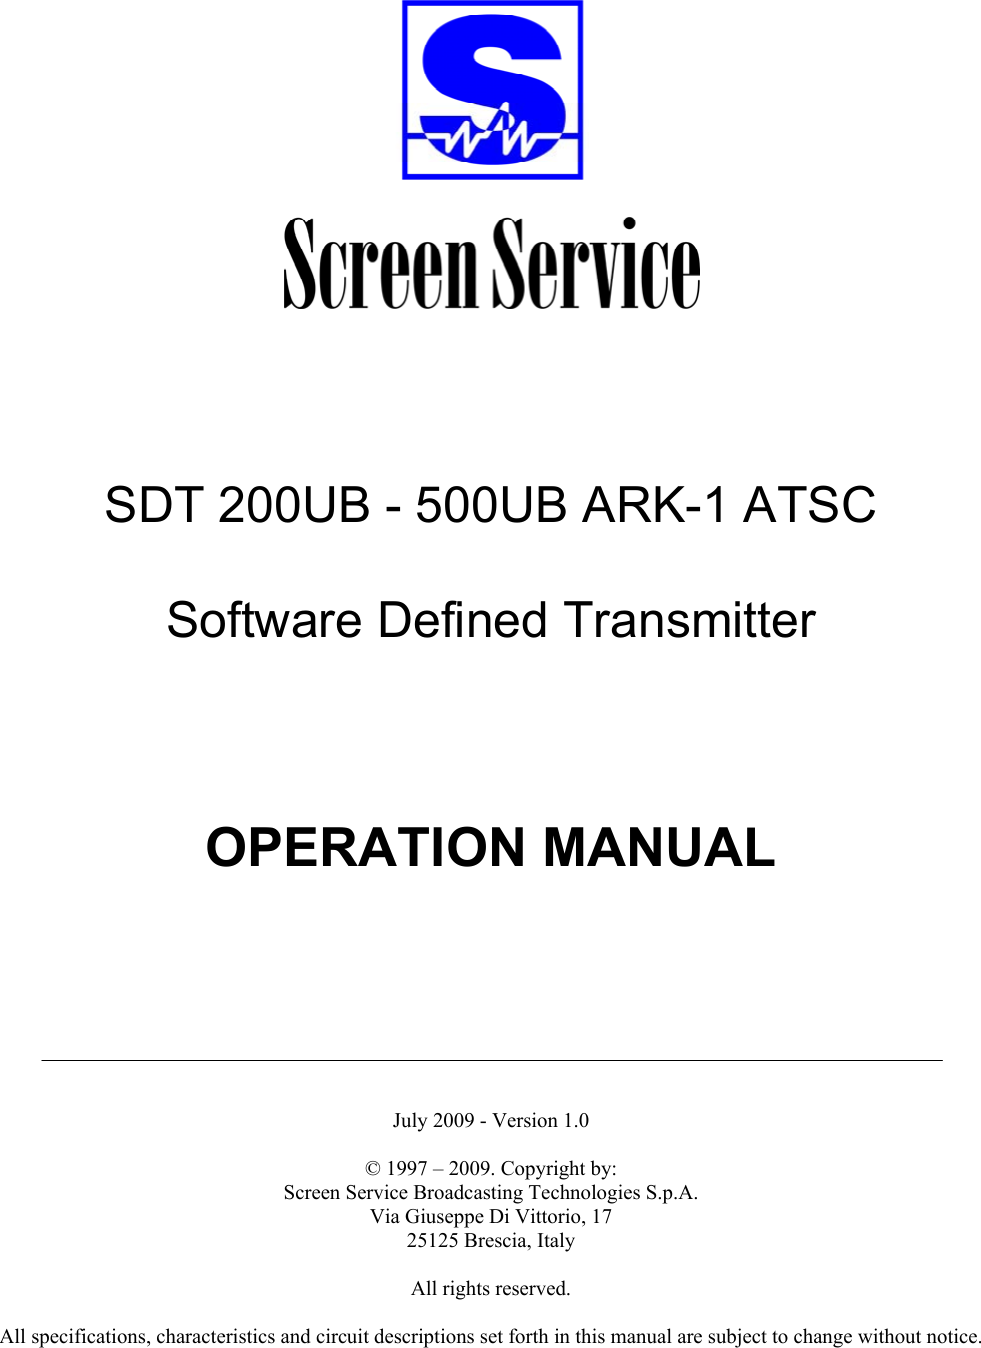            SDT 200UB - 500UB ARK-1 ATSC  Software Defined Transmitter        OPERATION MANUAL         July 2009 - Version 1.0  © 1997 – 2009. Copyright by:  Screen Service Broadcasting Technologies S.p.A. Via Giuseppe Di Vittorio, 17 25125 Brescia, Italy  All rights reserved.  All specifications, characteristics and circuit descriptions set forth in this manual are subject to change without notice.  